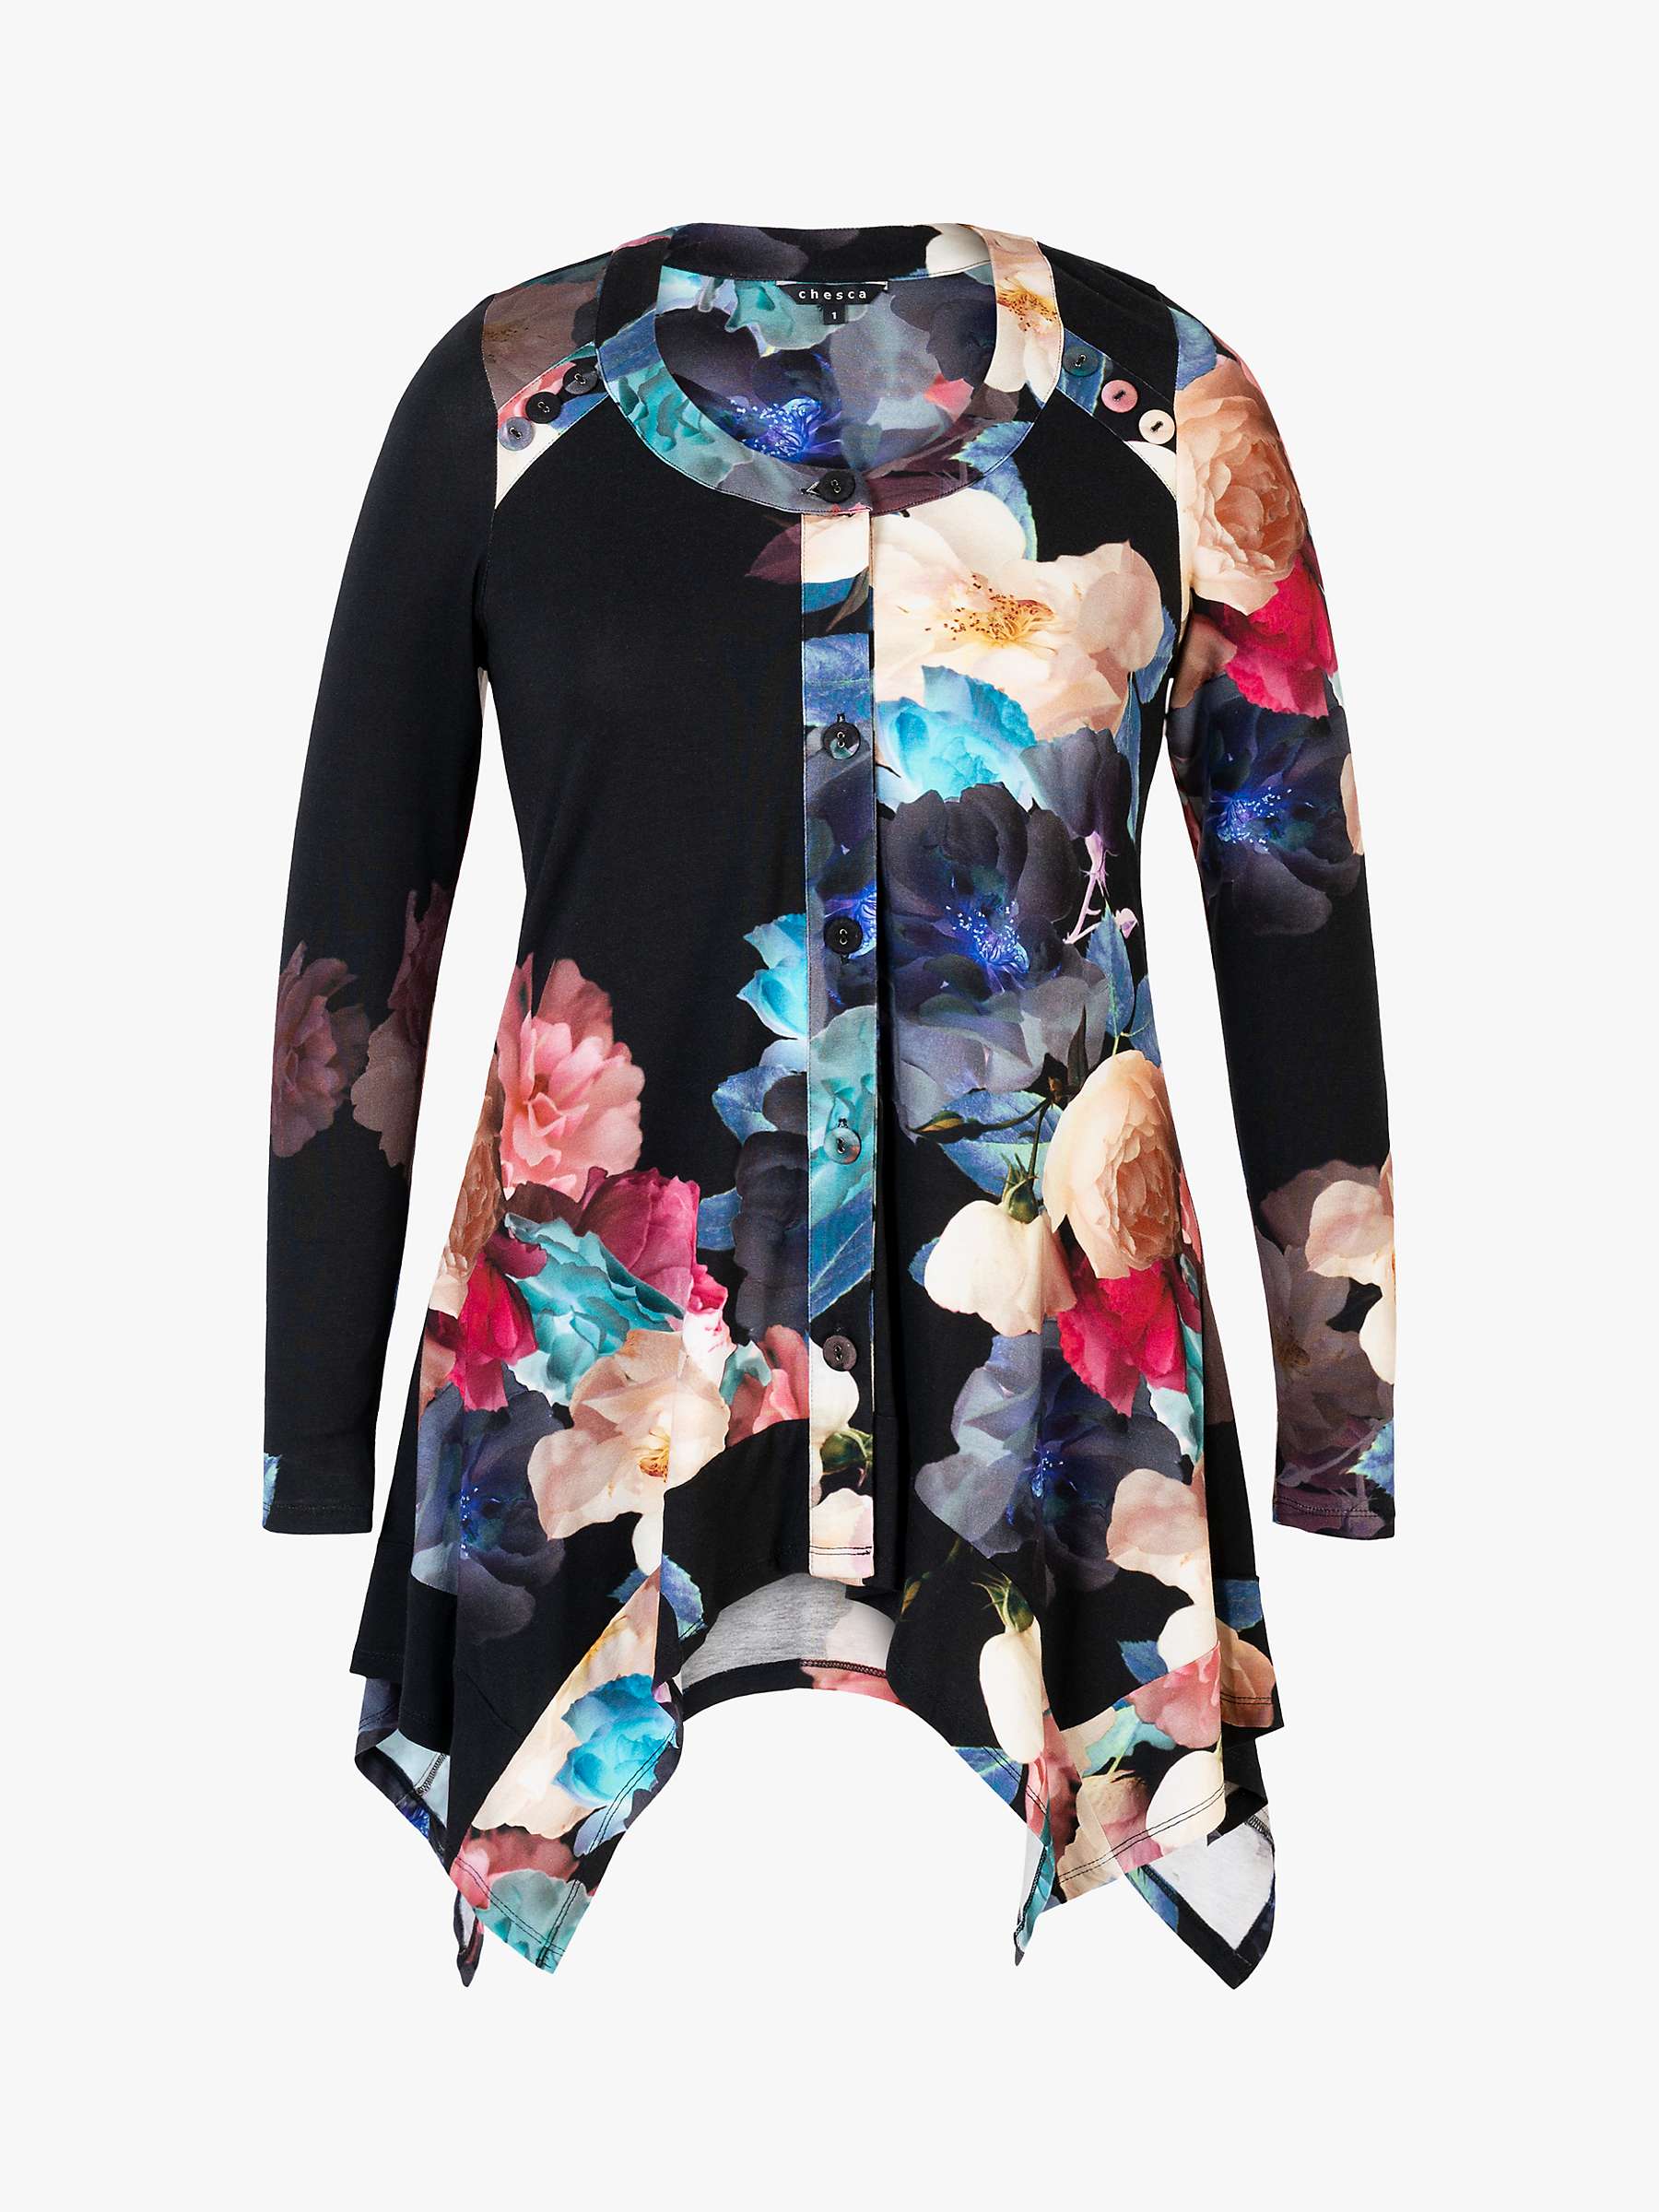 Buy chesca Melody Print Jersey Top, Black/Multi Online at johnlewis.com